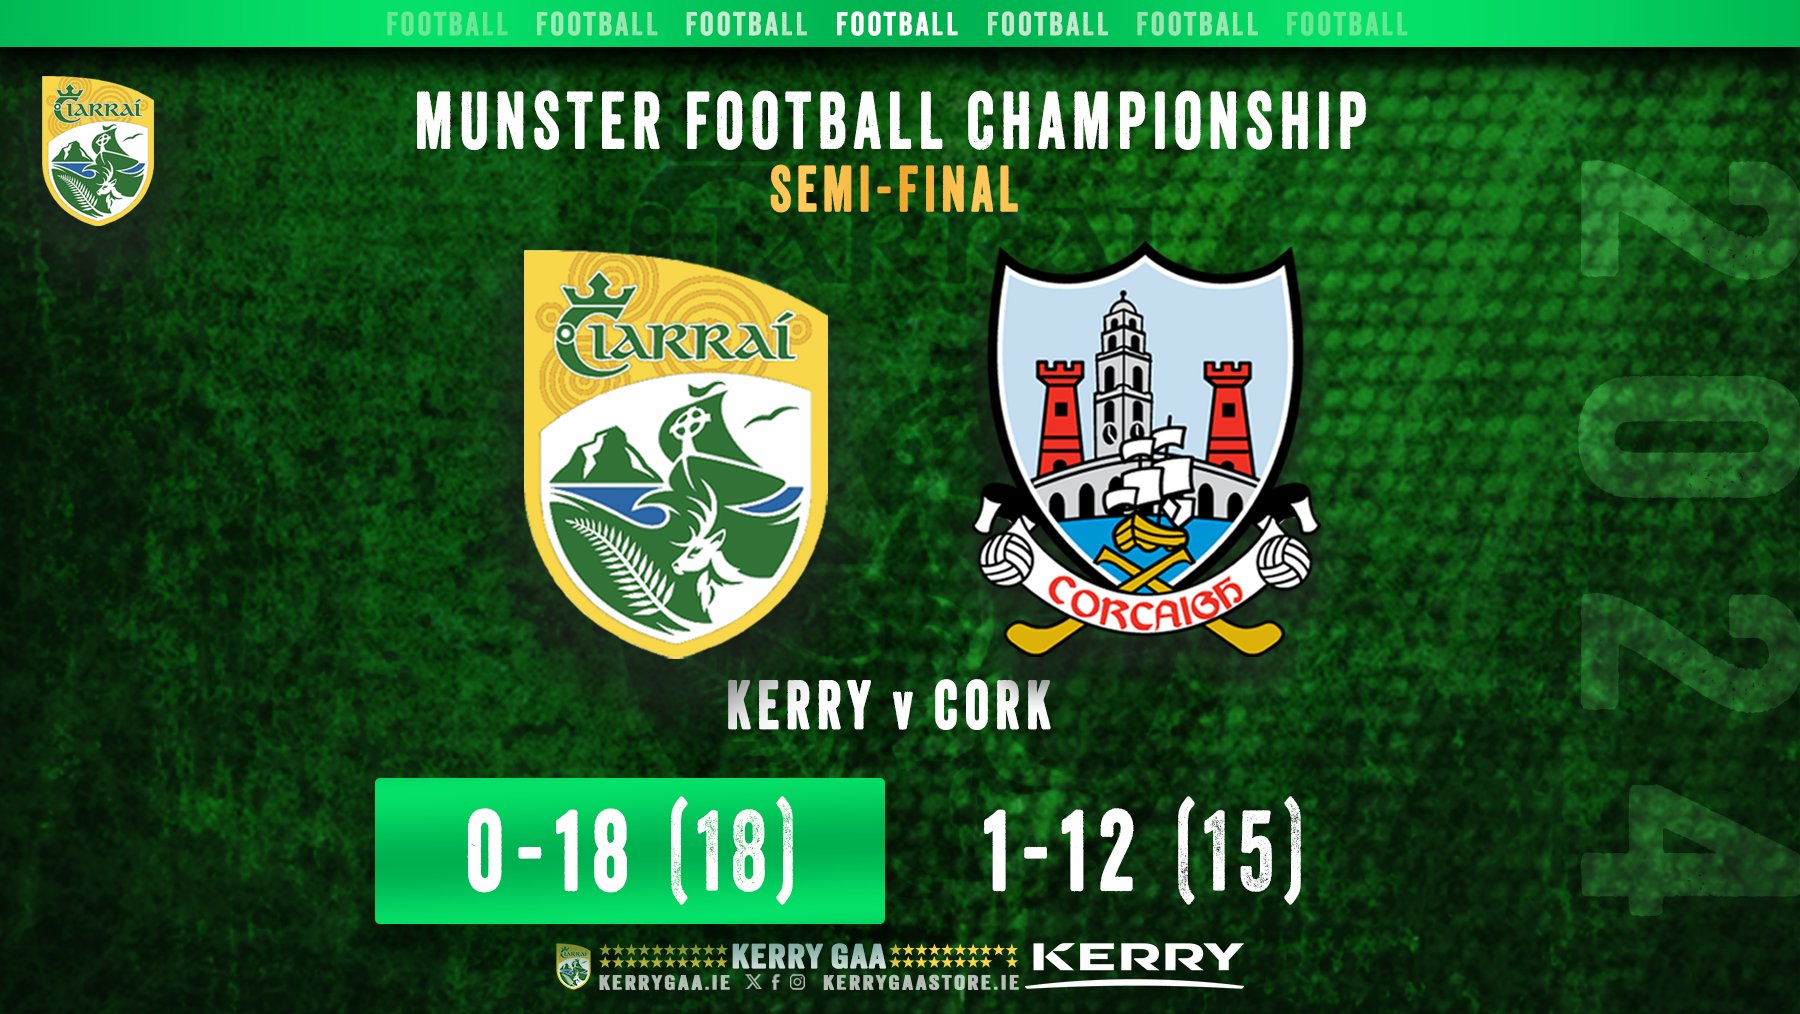 Victory for Kerry over Cork in Munster SFC Semi-Final